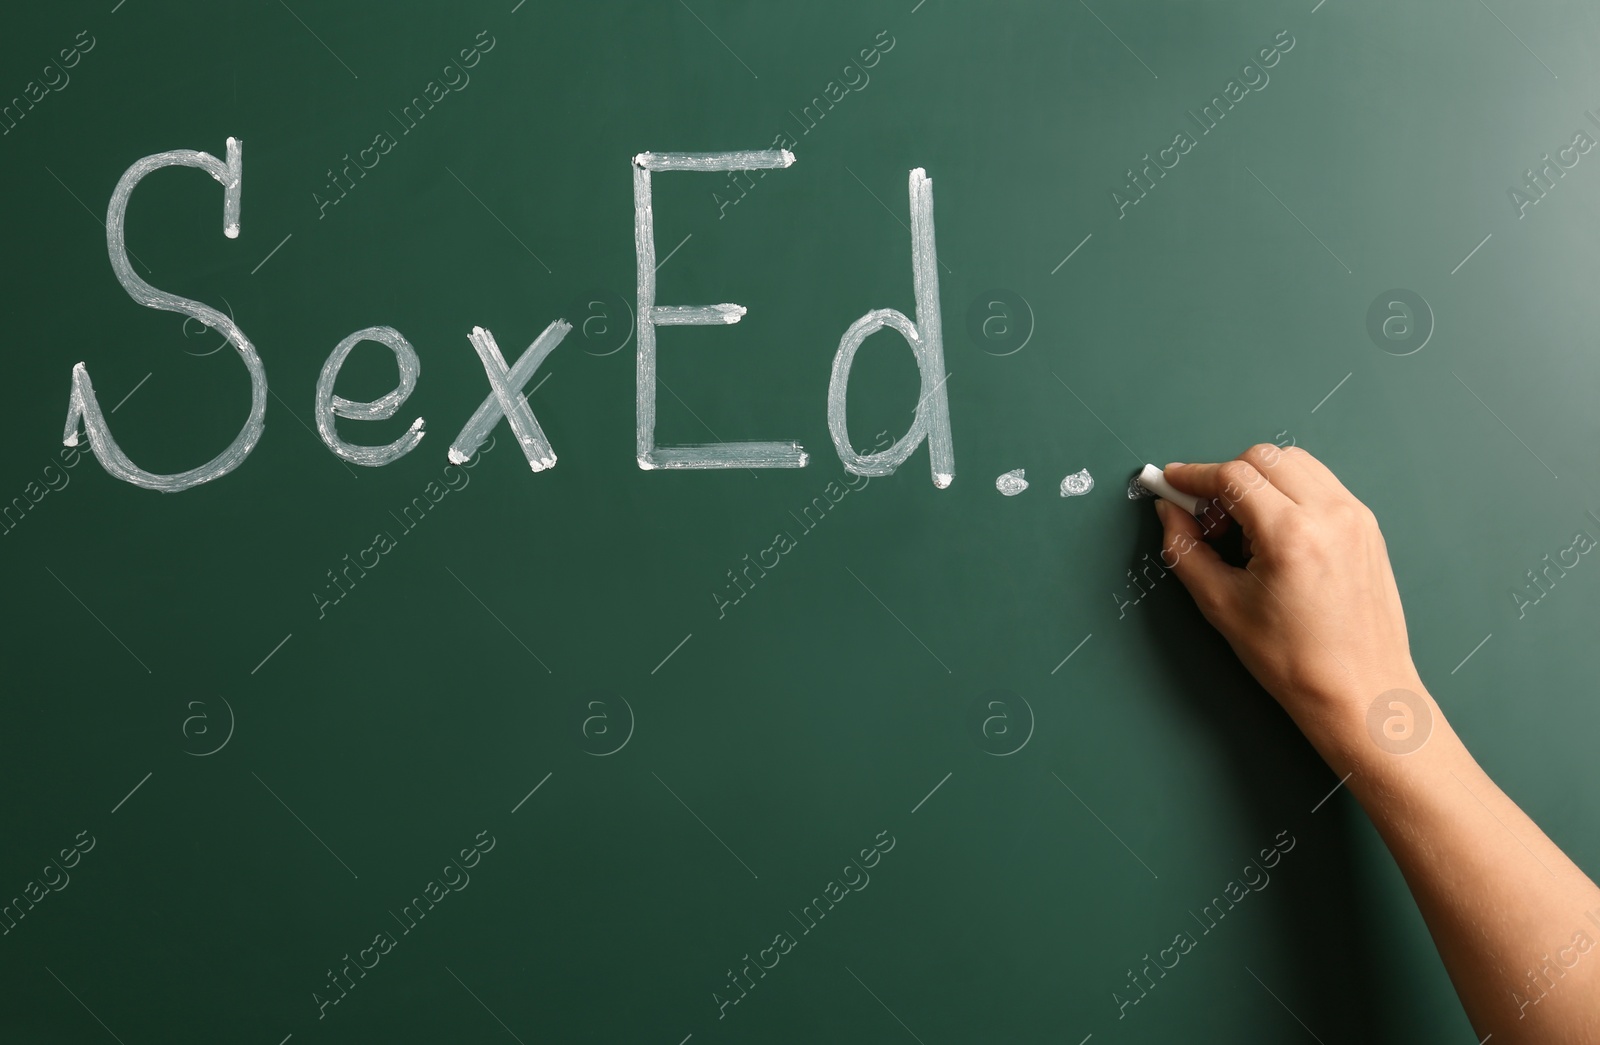 Photo of Woman writing text "SEX ED..." on green chalkboard